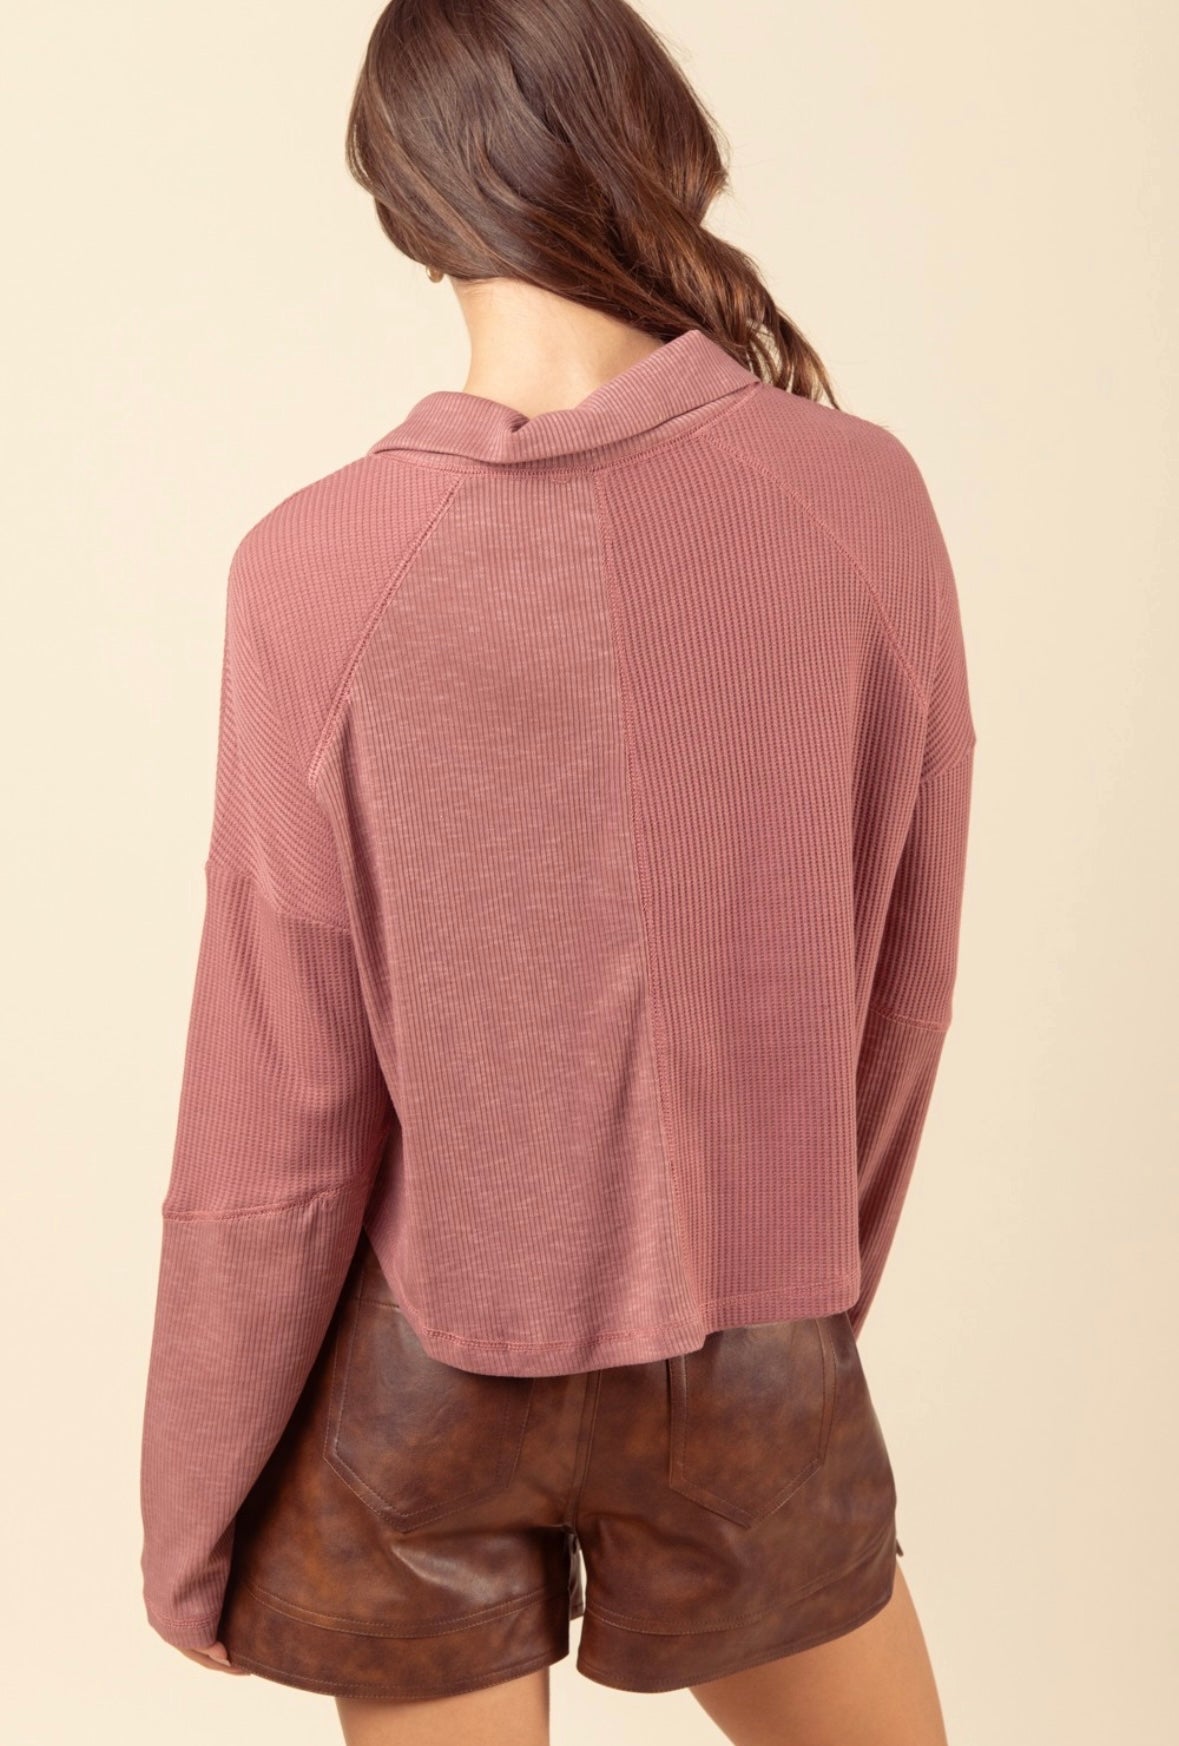 TWO COLORS - Raven Mock Neck Ribbed Henley Knit Top